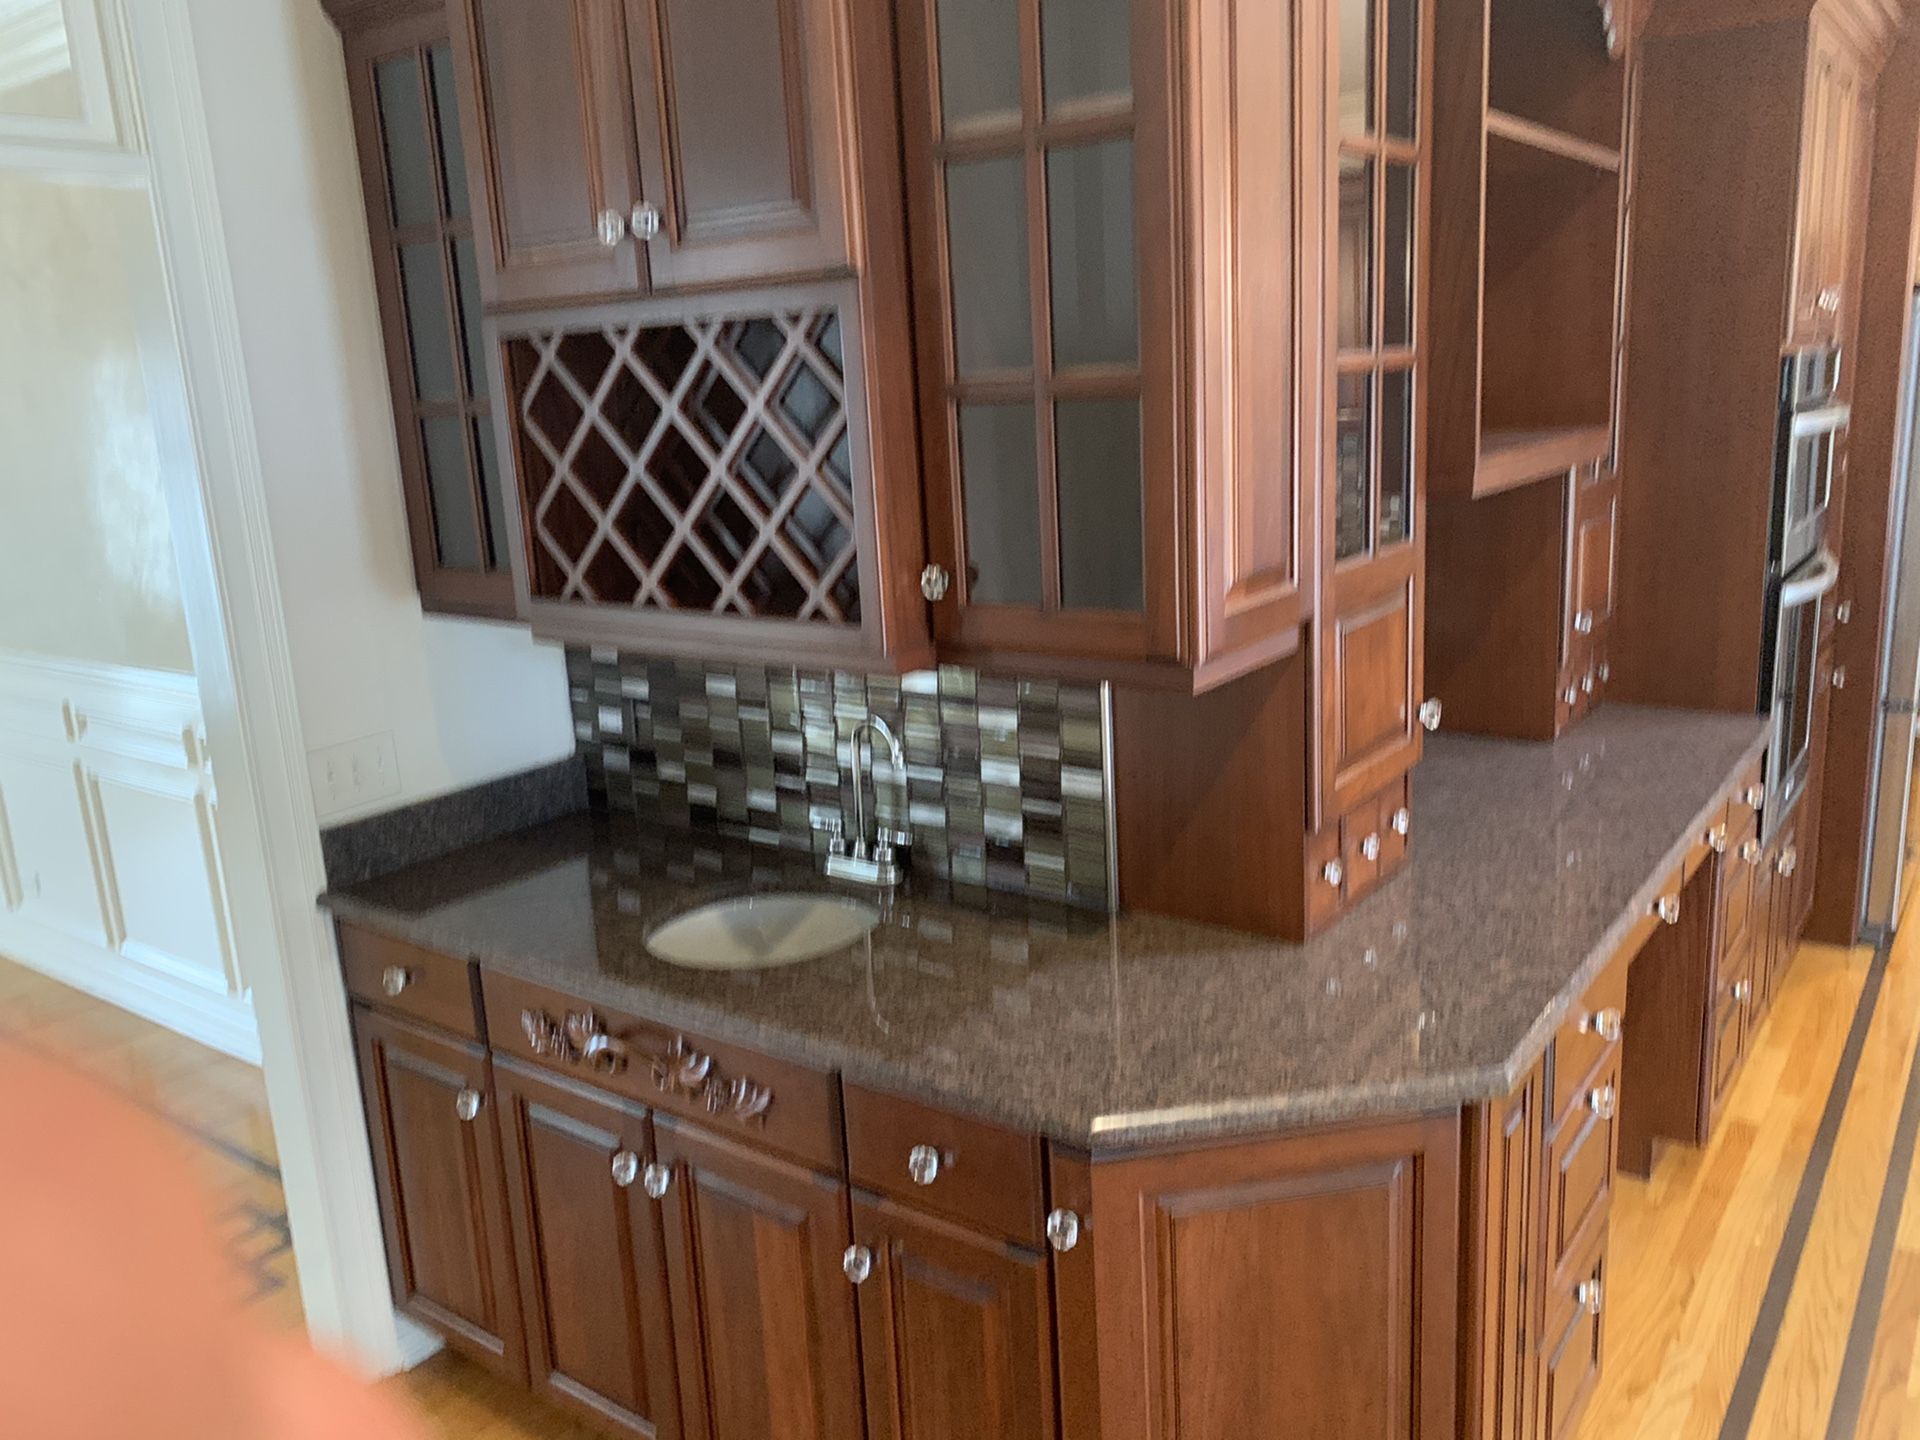 Kitchen cabinets and top